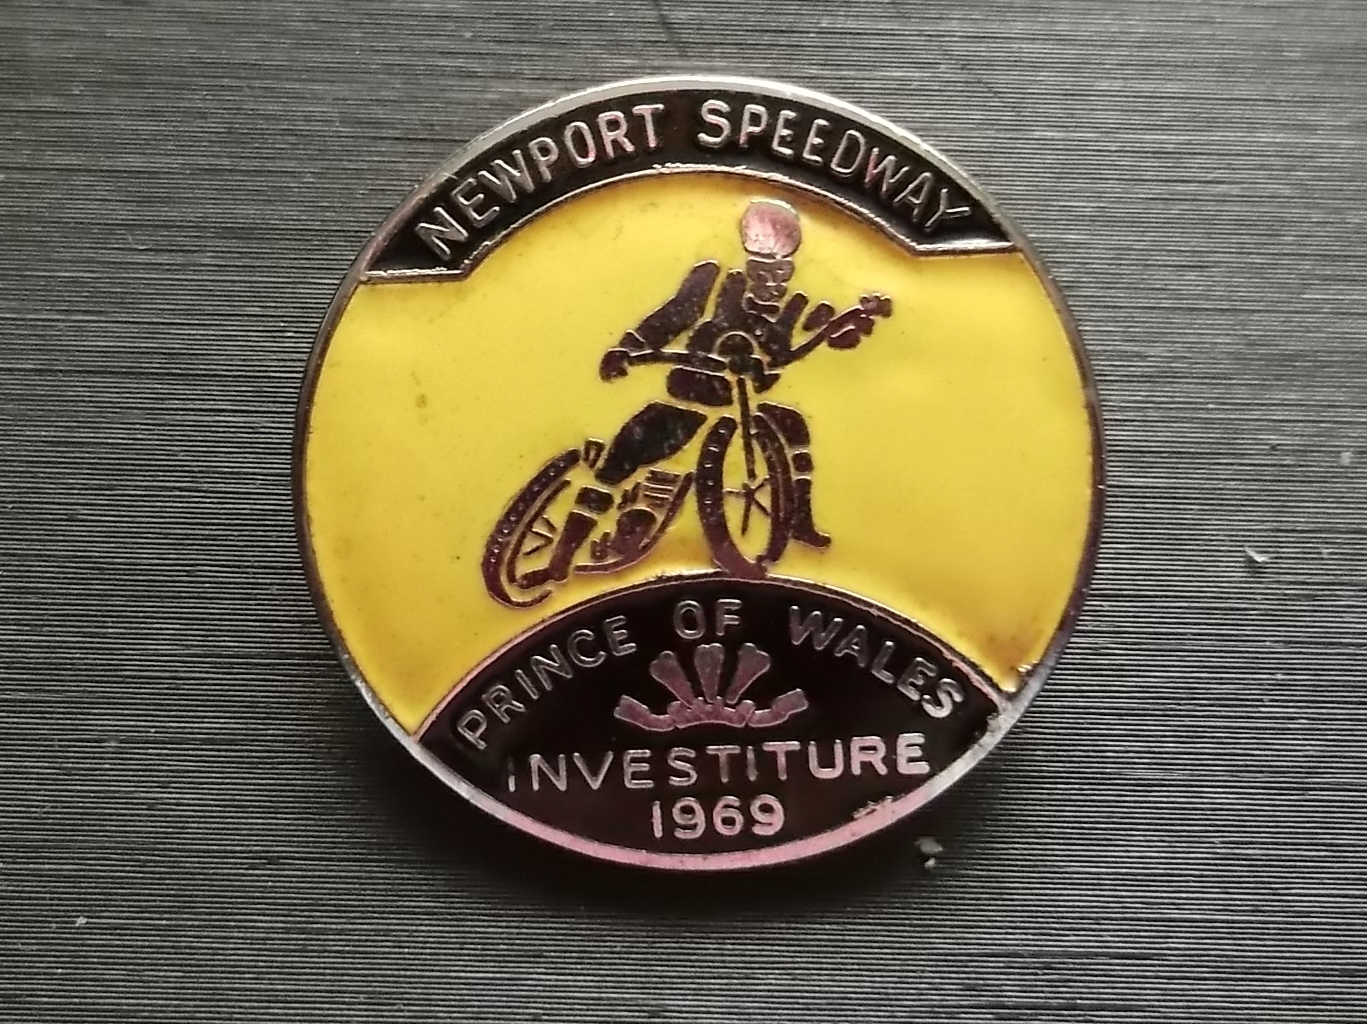 SPEEDWAY - NEWPORT 1969 PRINCE OF WALES INVESTITURE BADGE